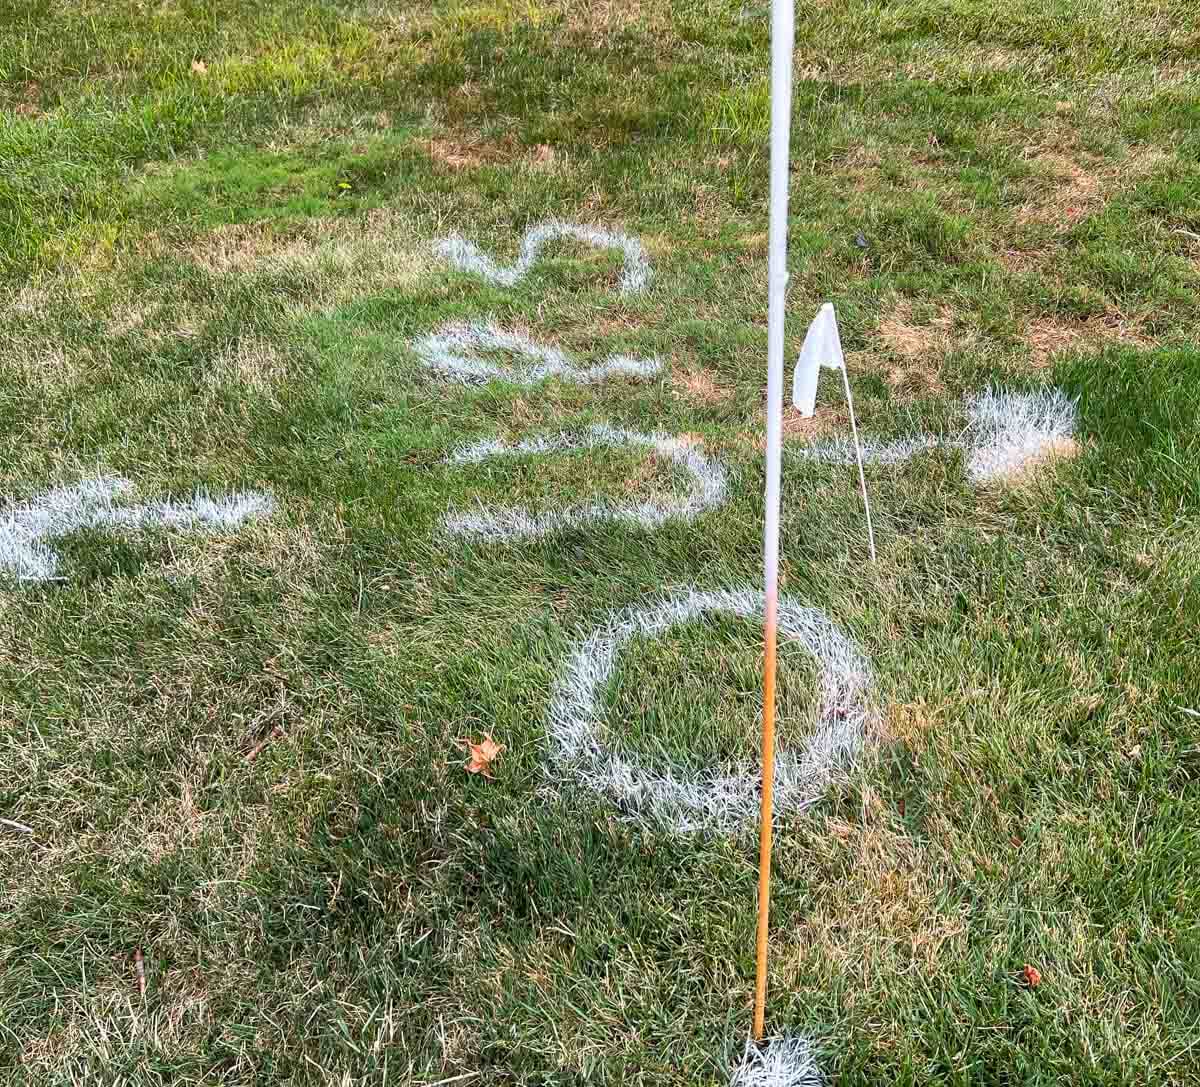 oups with white spray painted on grass with small orange pole in the grond.